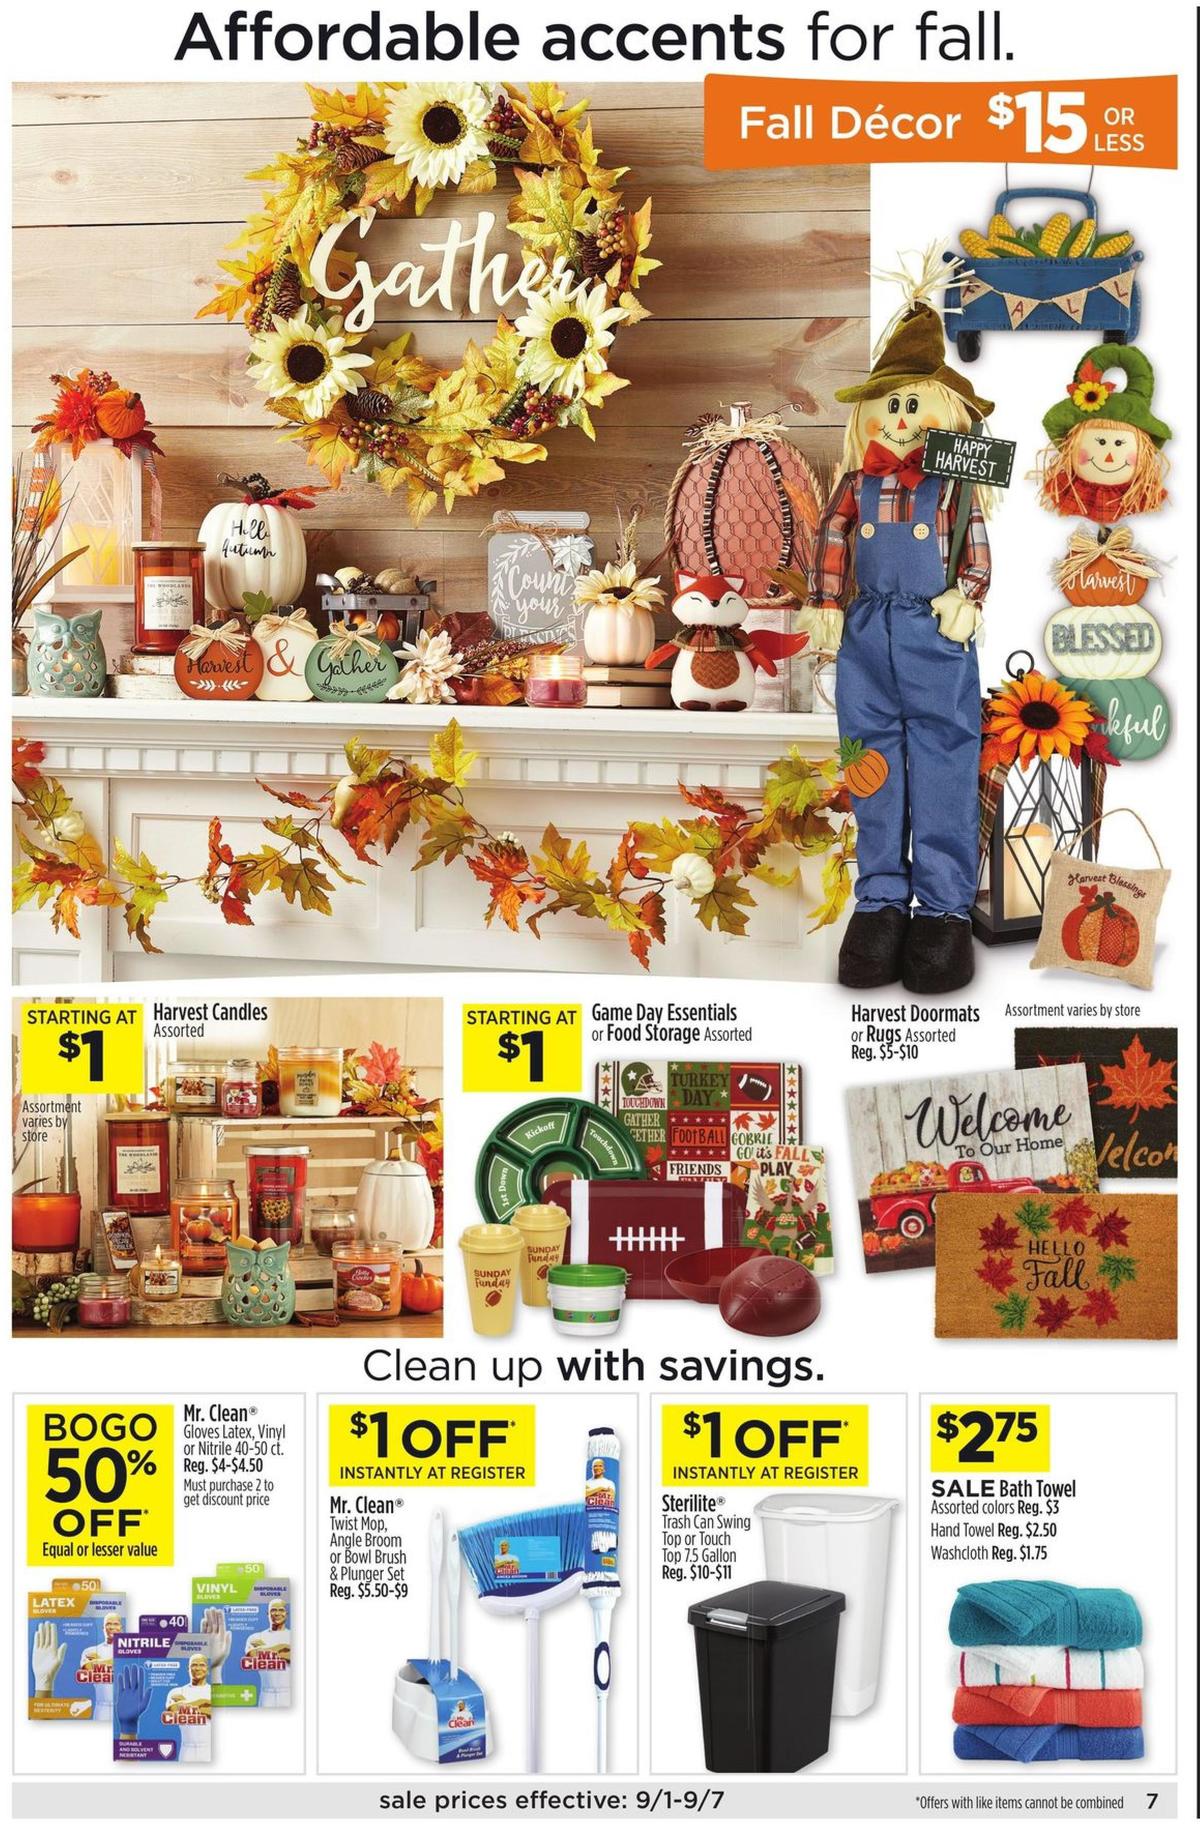 Dollar General Weekly Ad from September 1